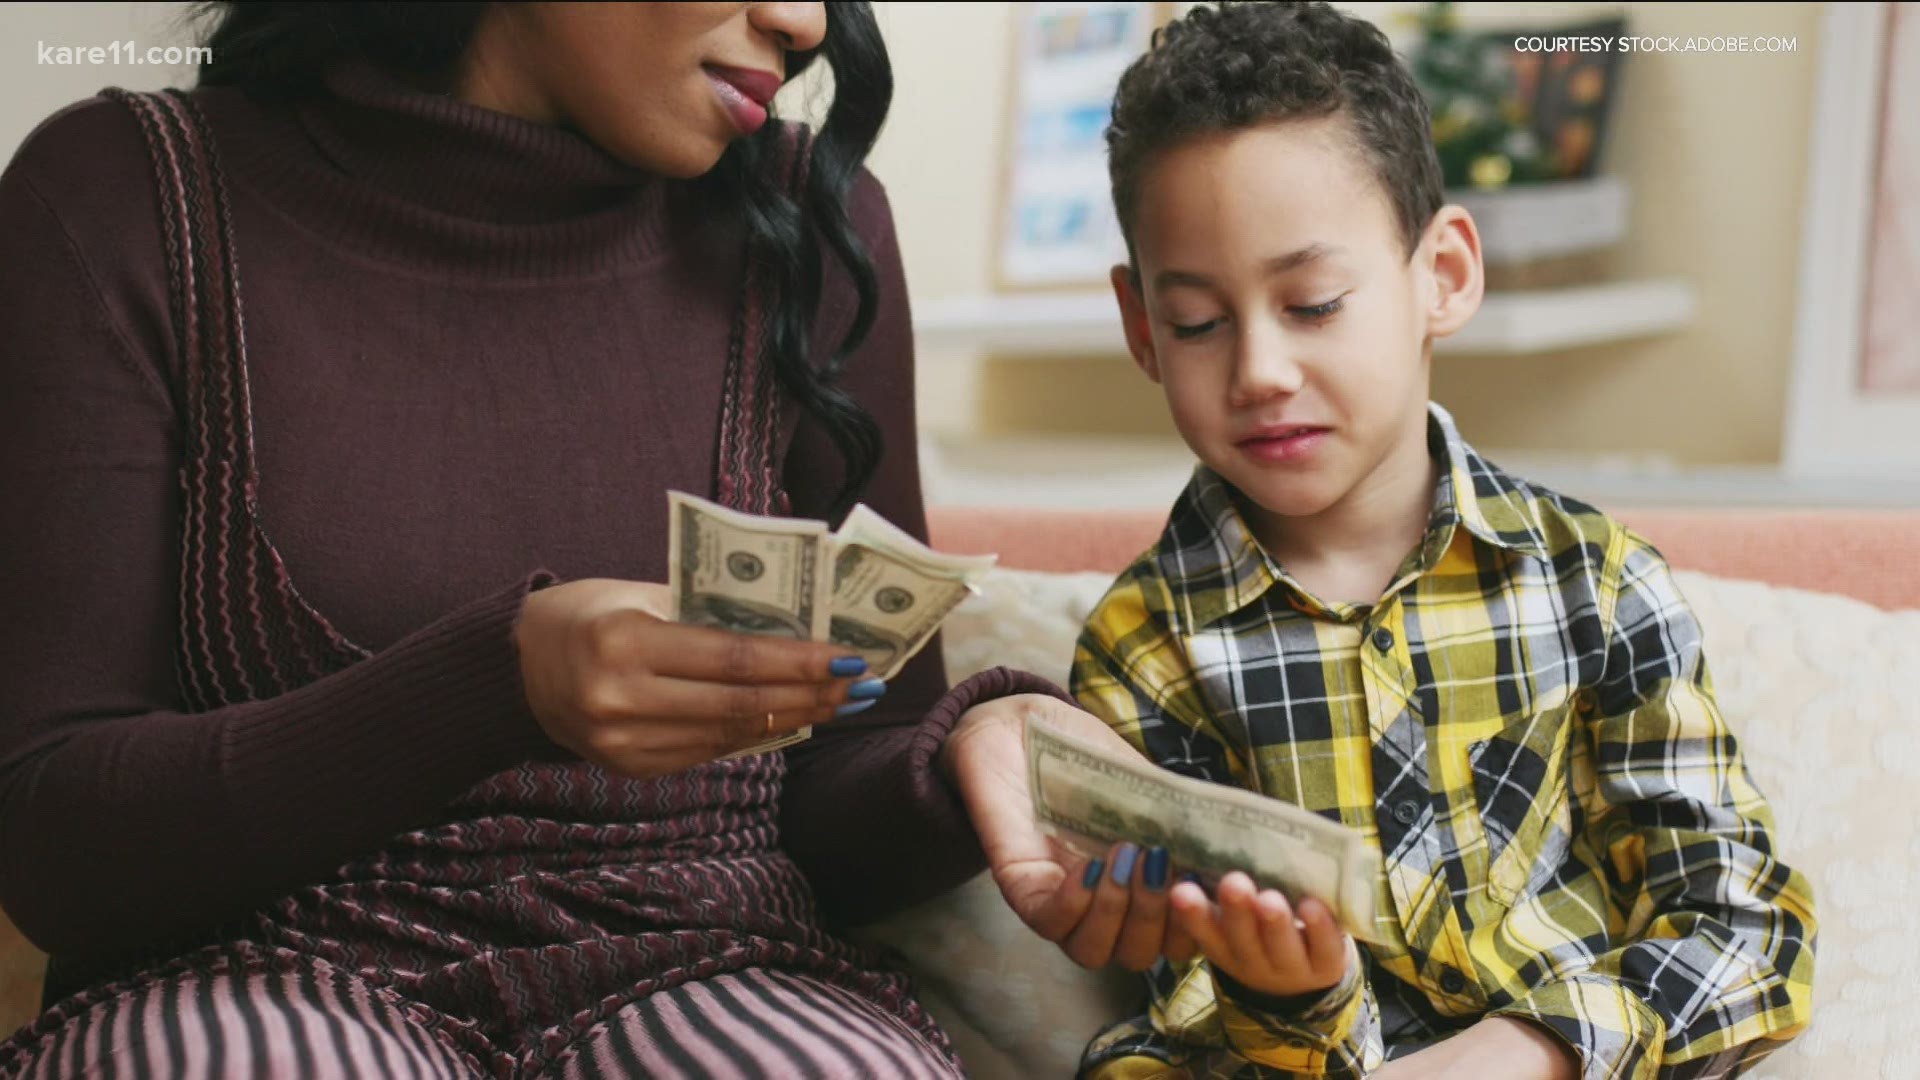 Here are five  tips for kids and teens learning money management skills, from savings accounts to your credit score.